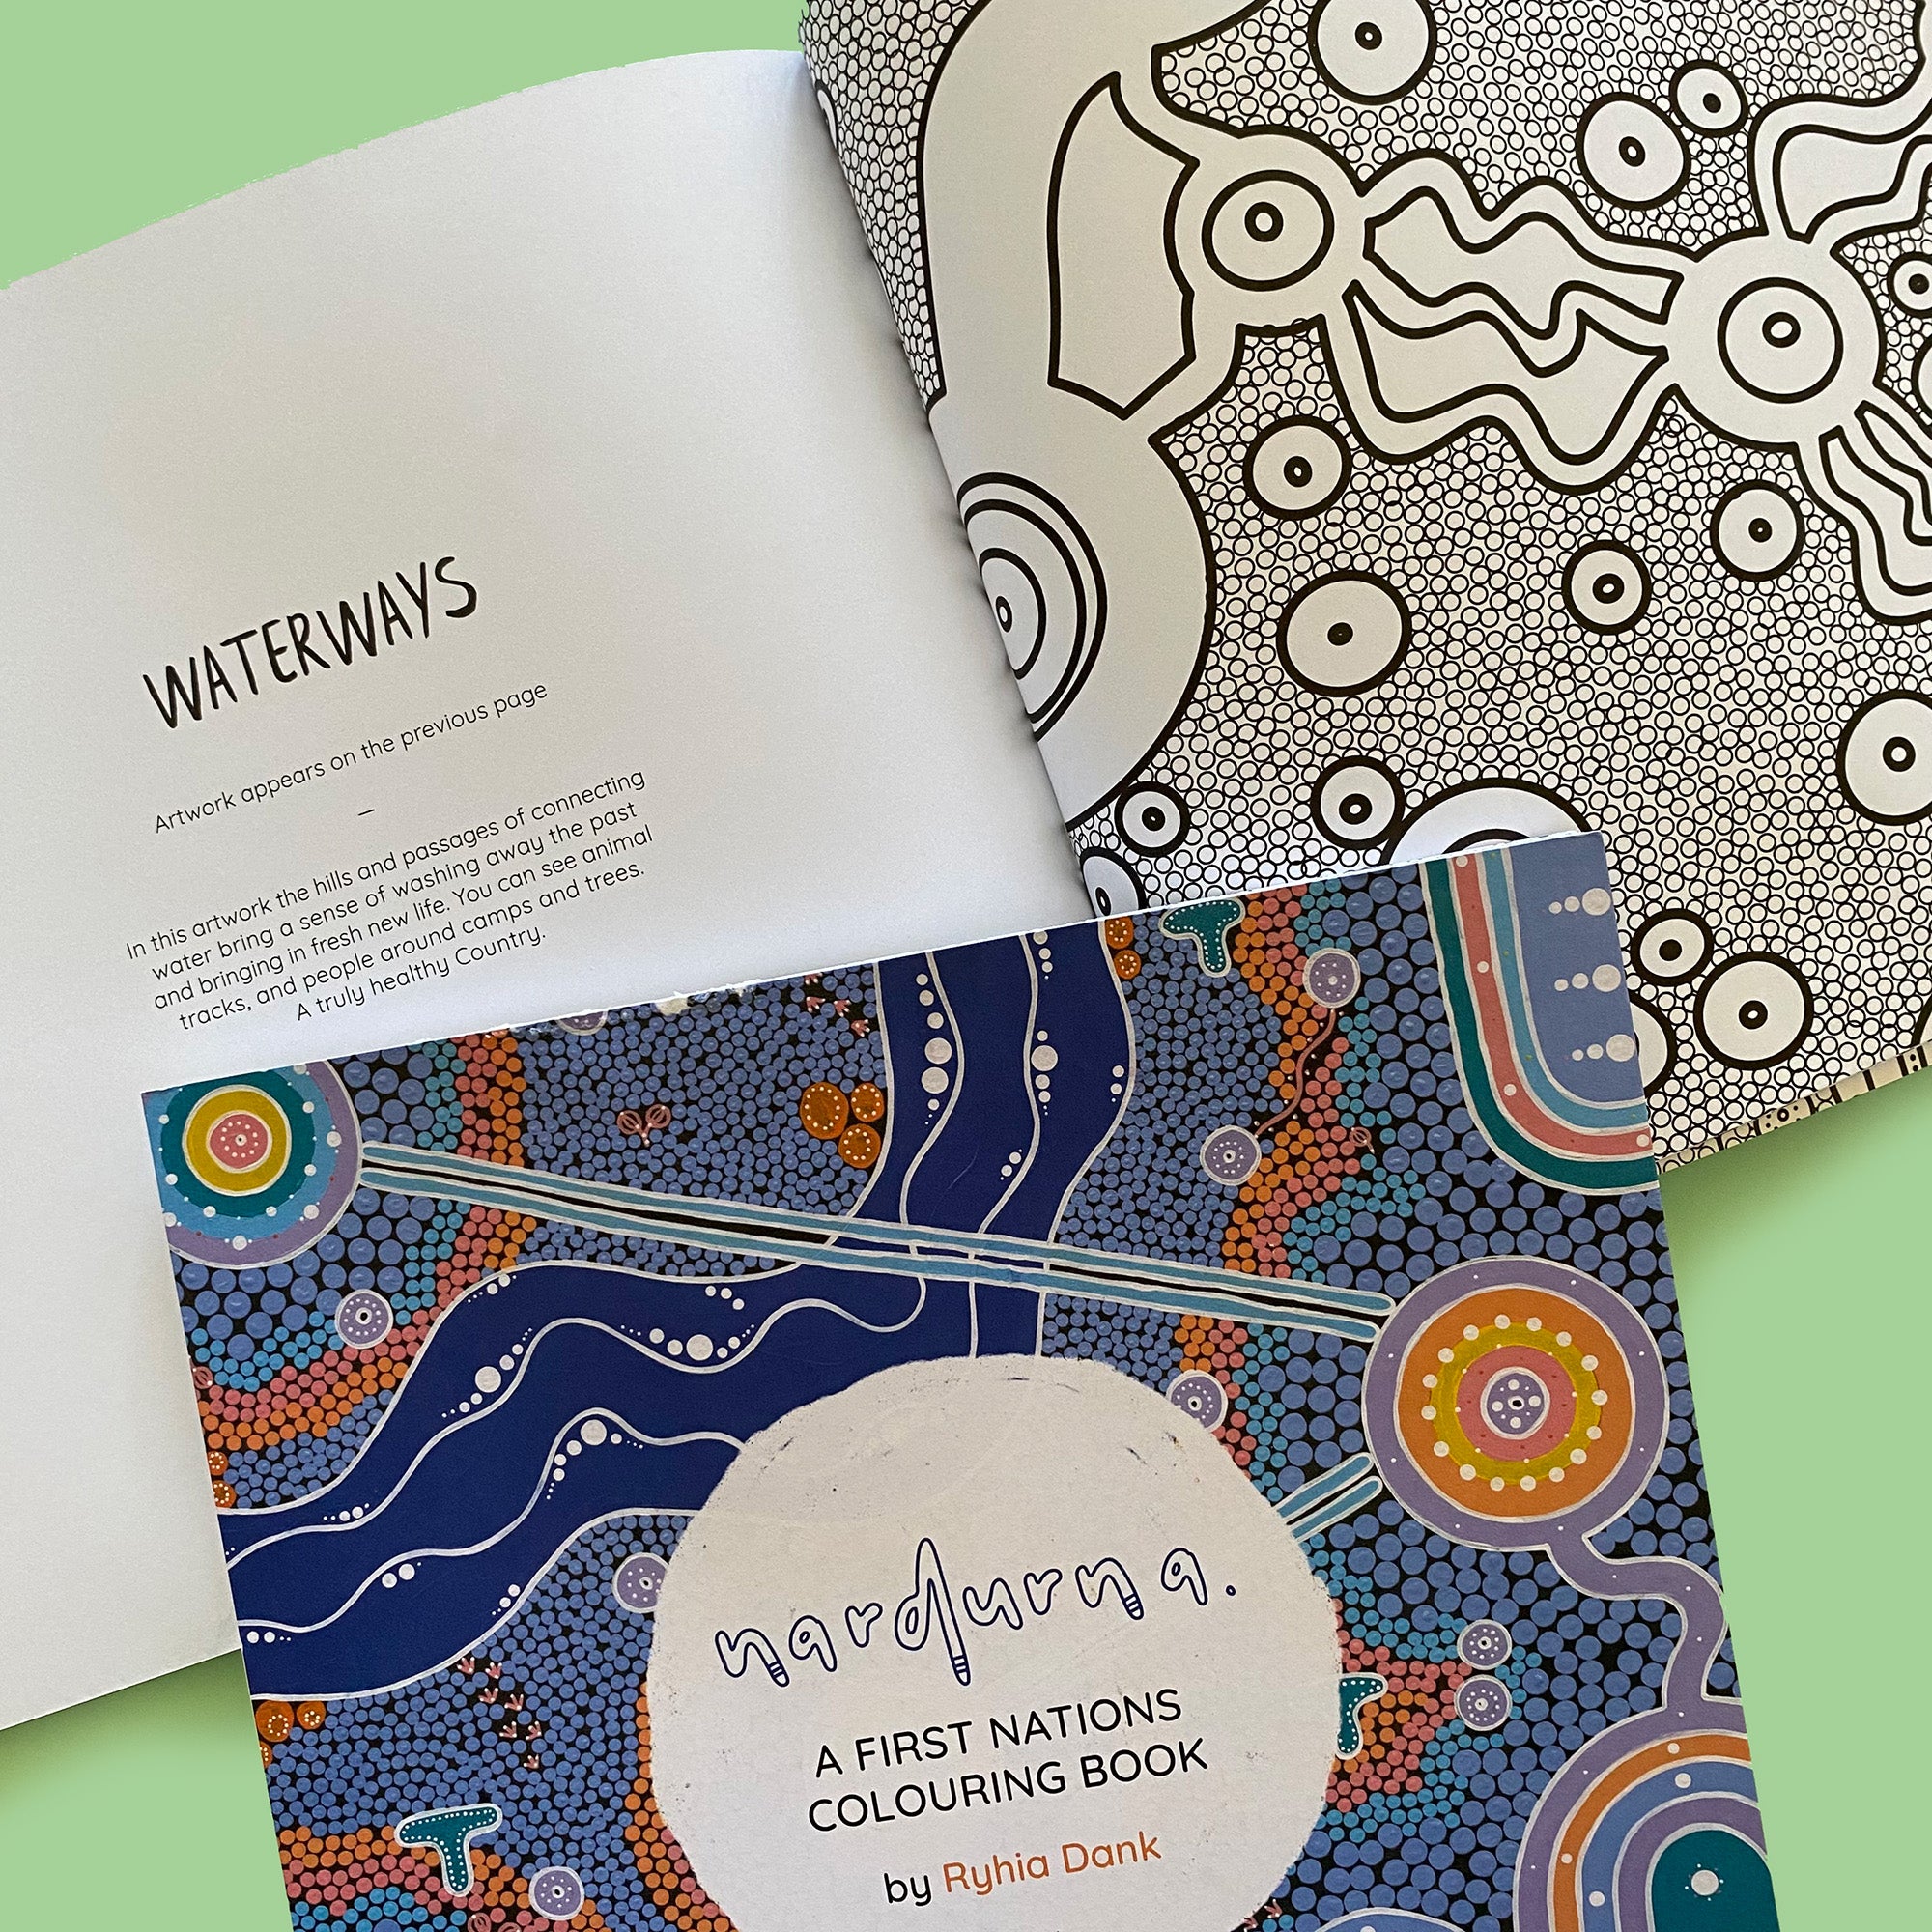 Nardurna - A First Nations Colouring Book